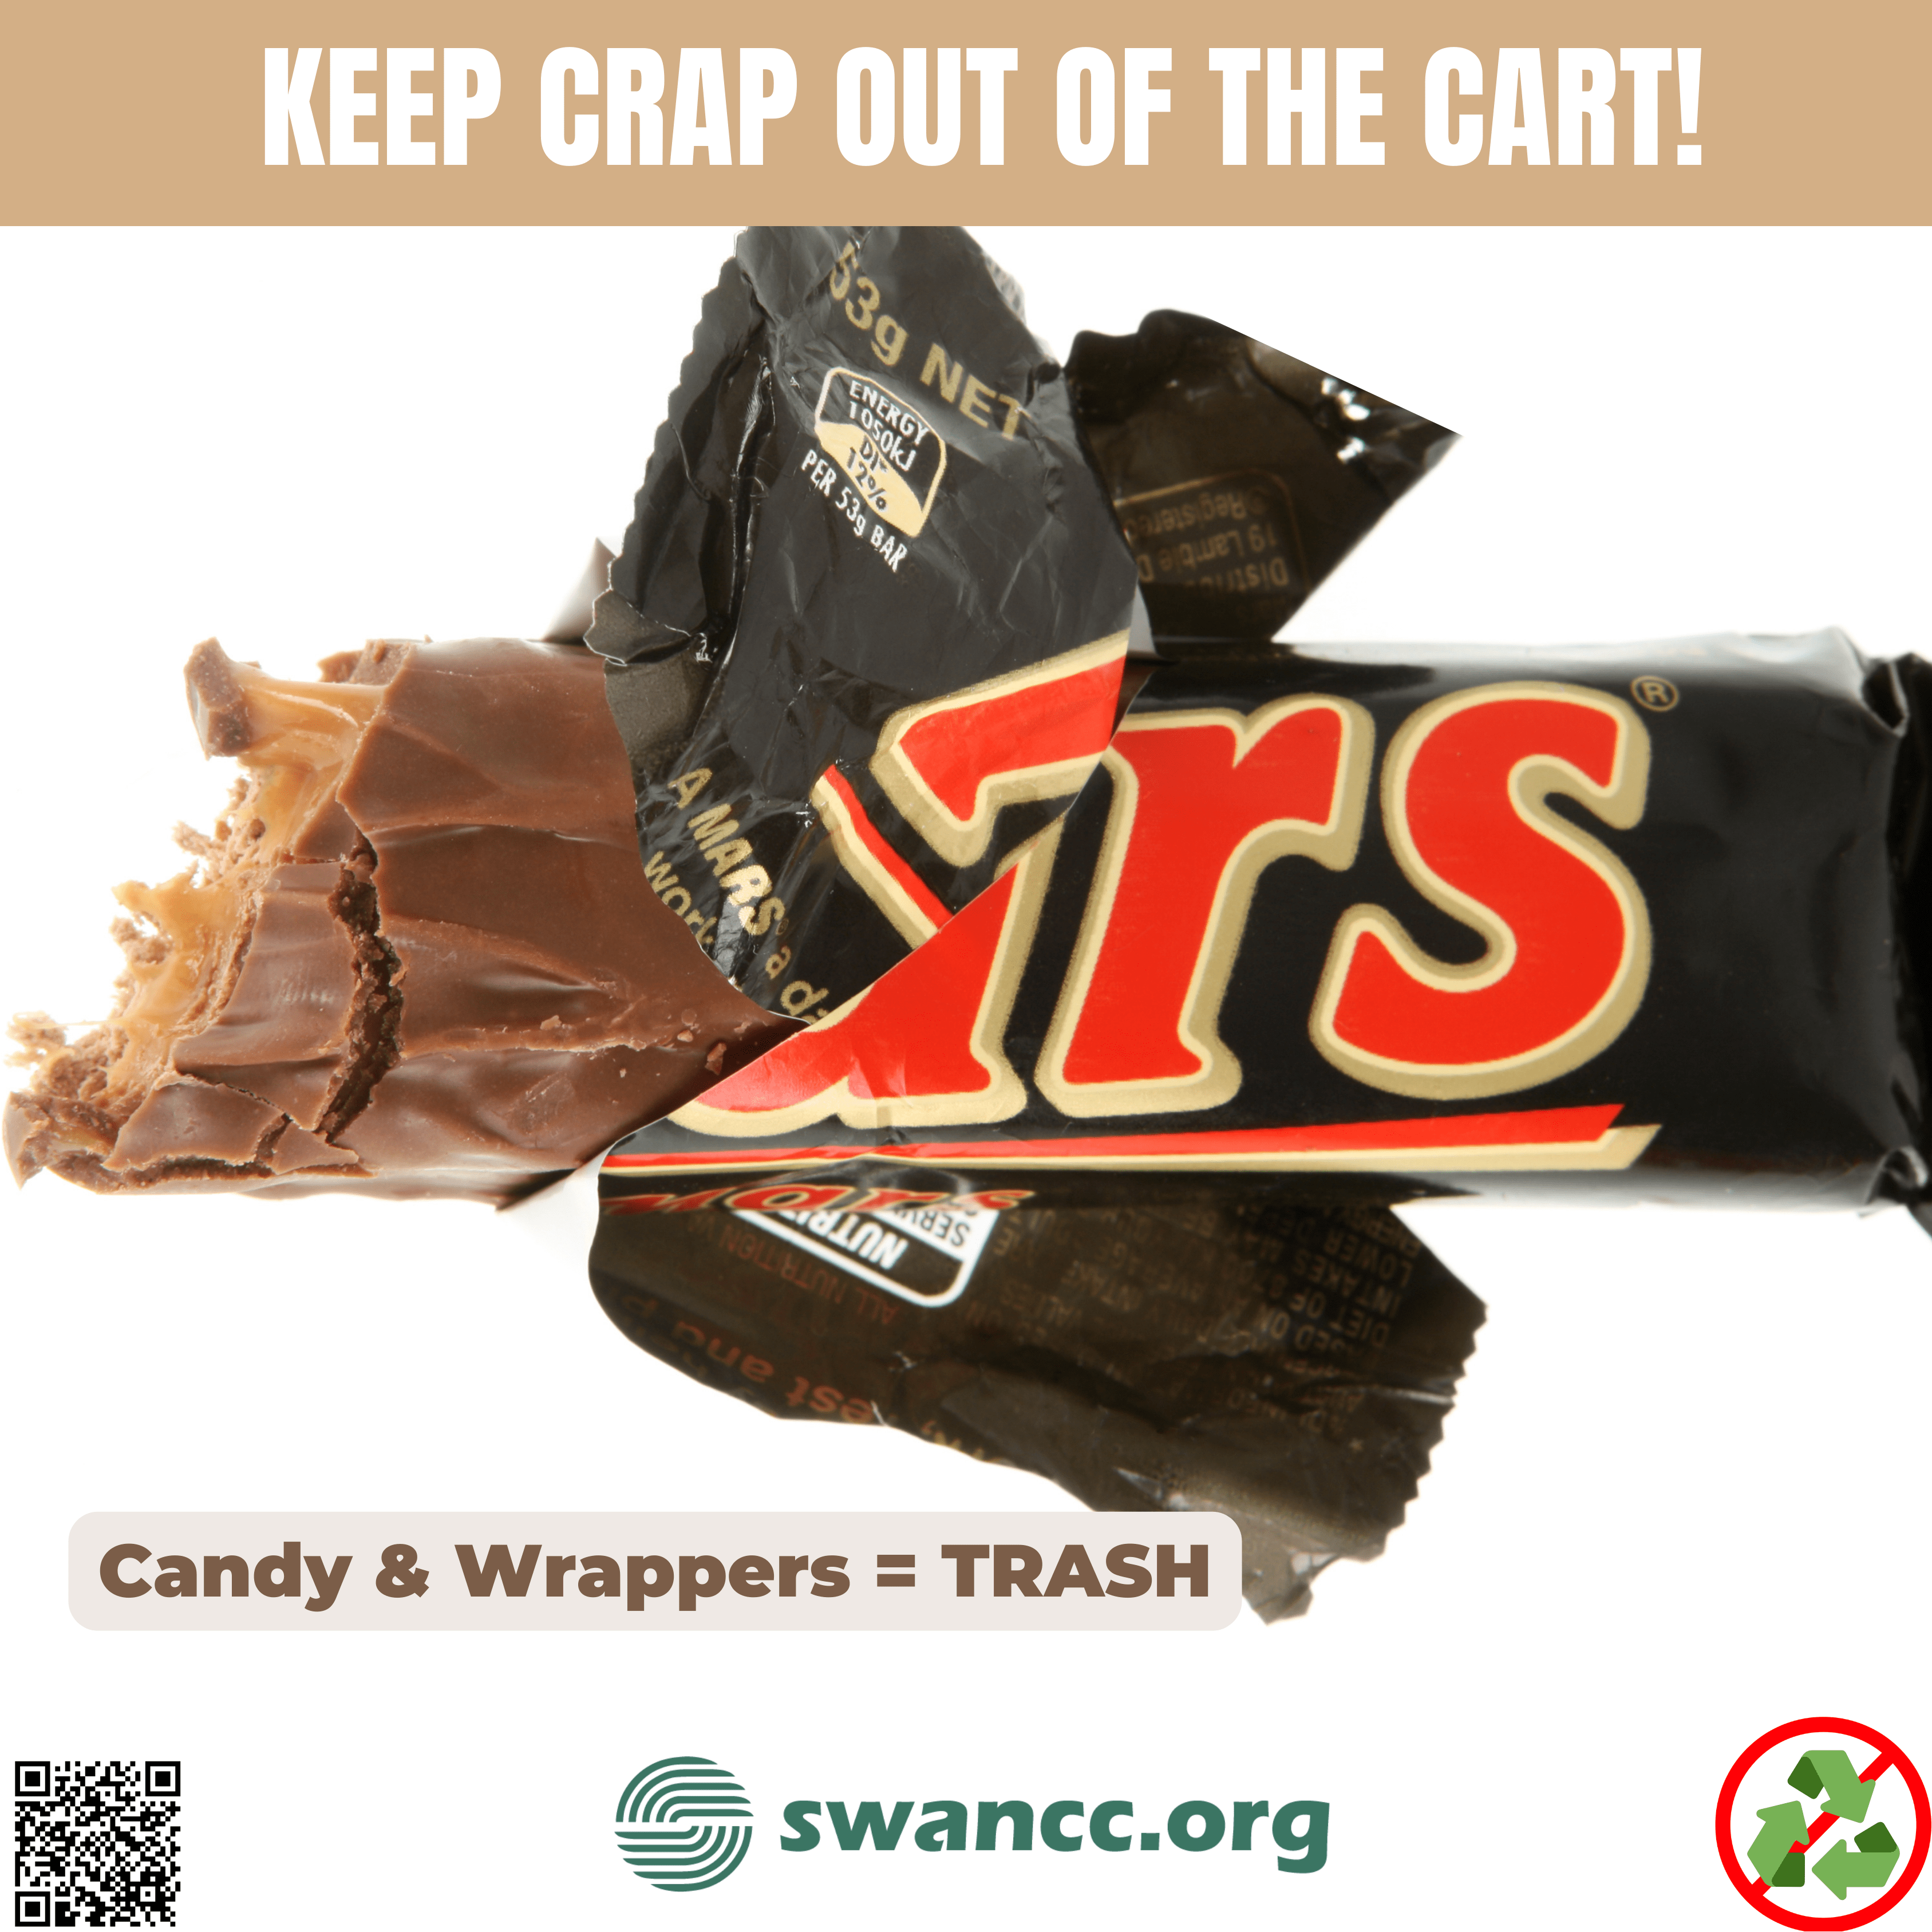 Candy & Wrappers = Trash